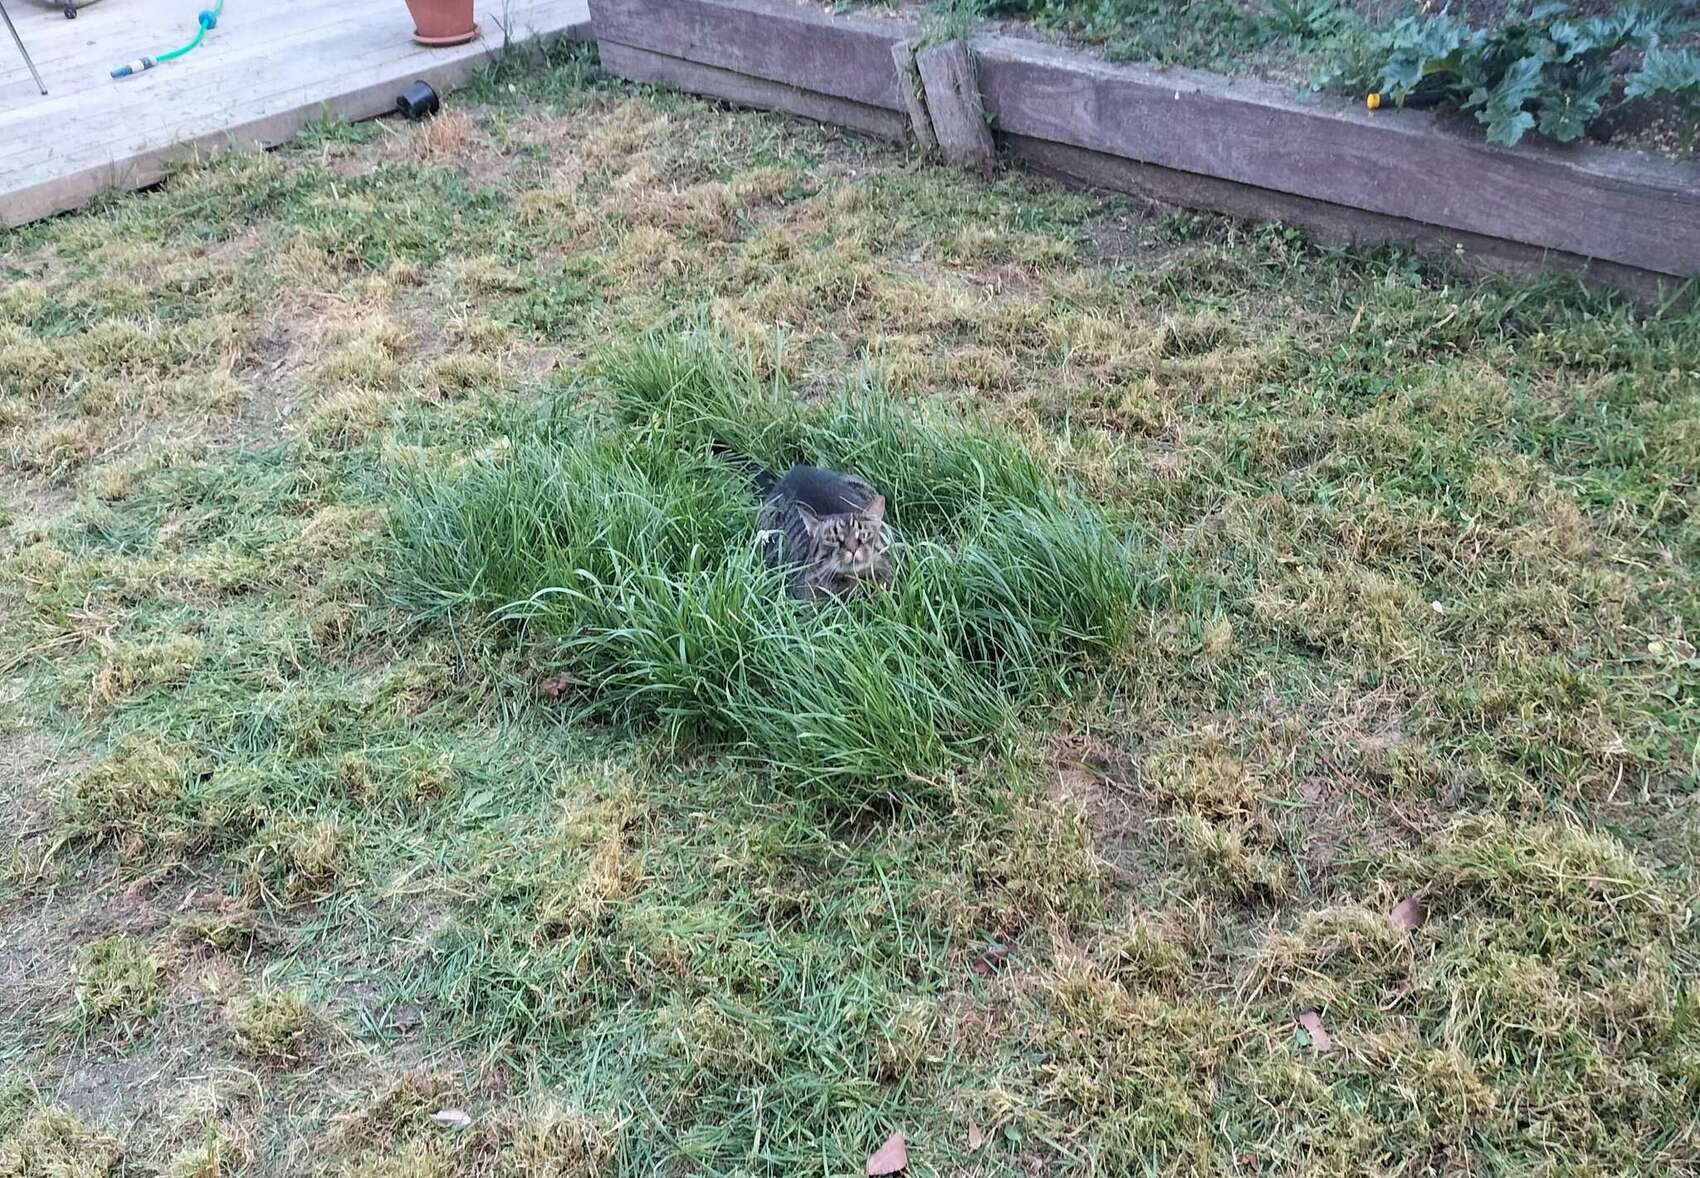 “I had to mow my lawn, but my cat loves chilling in it, so I left a little patch for him.”